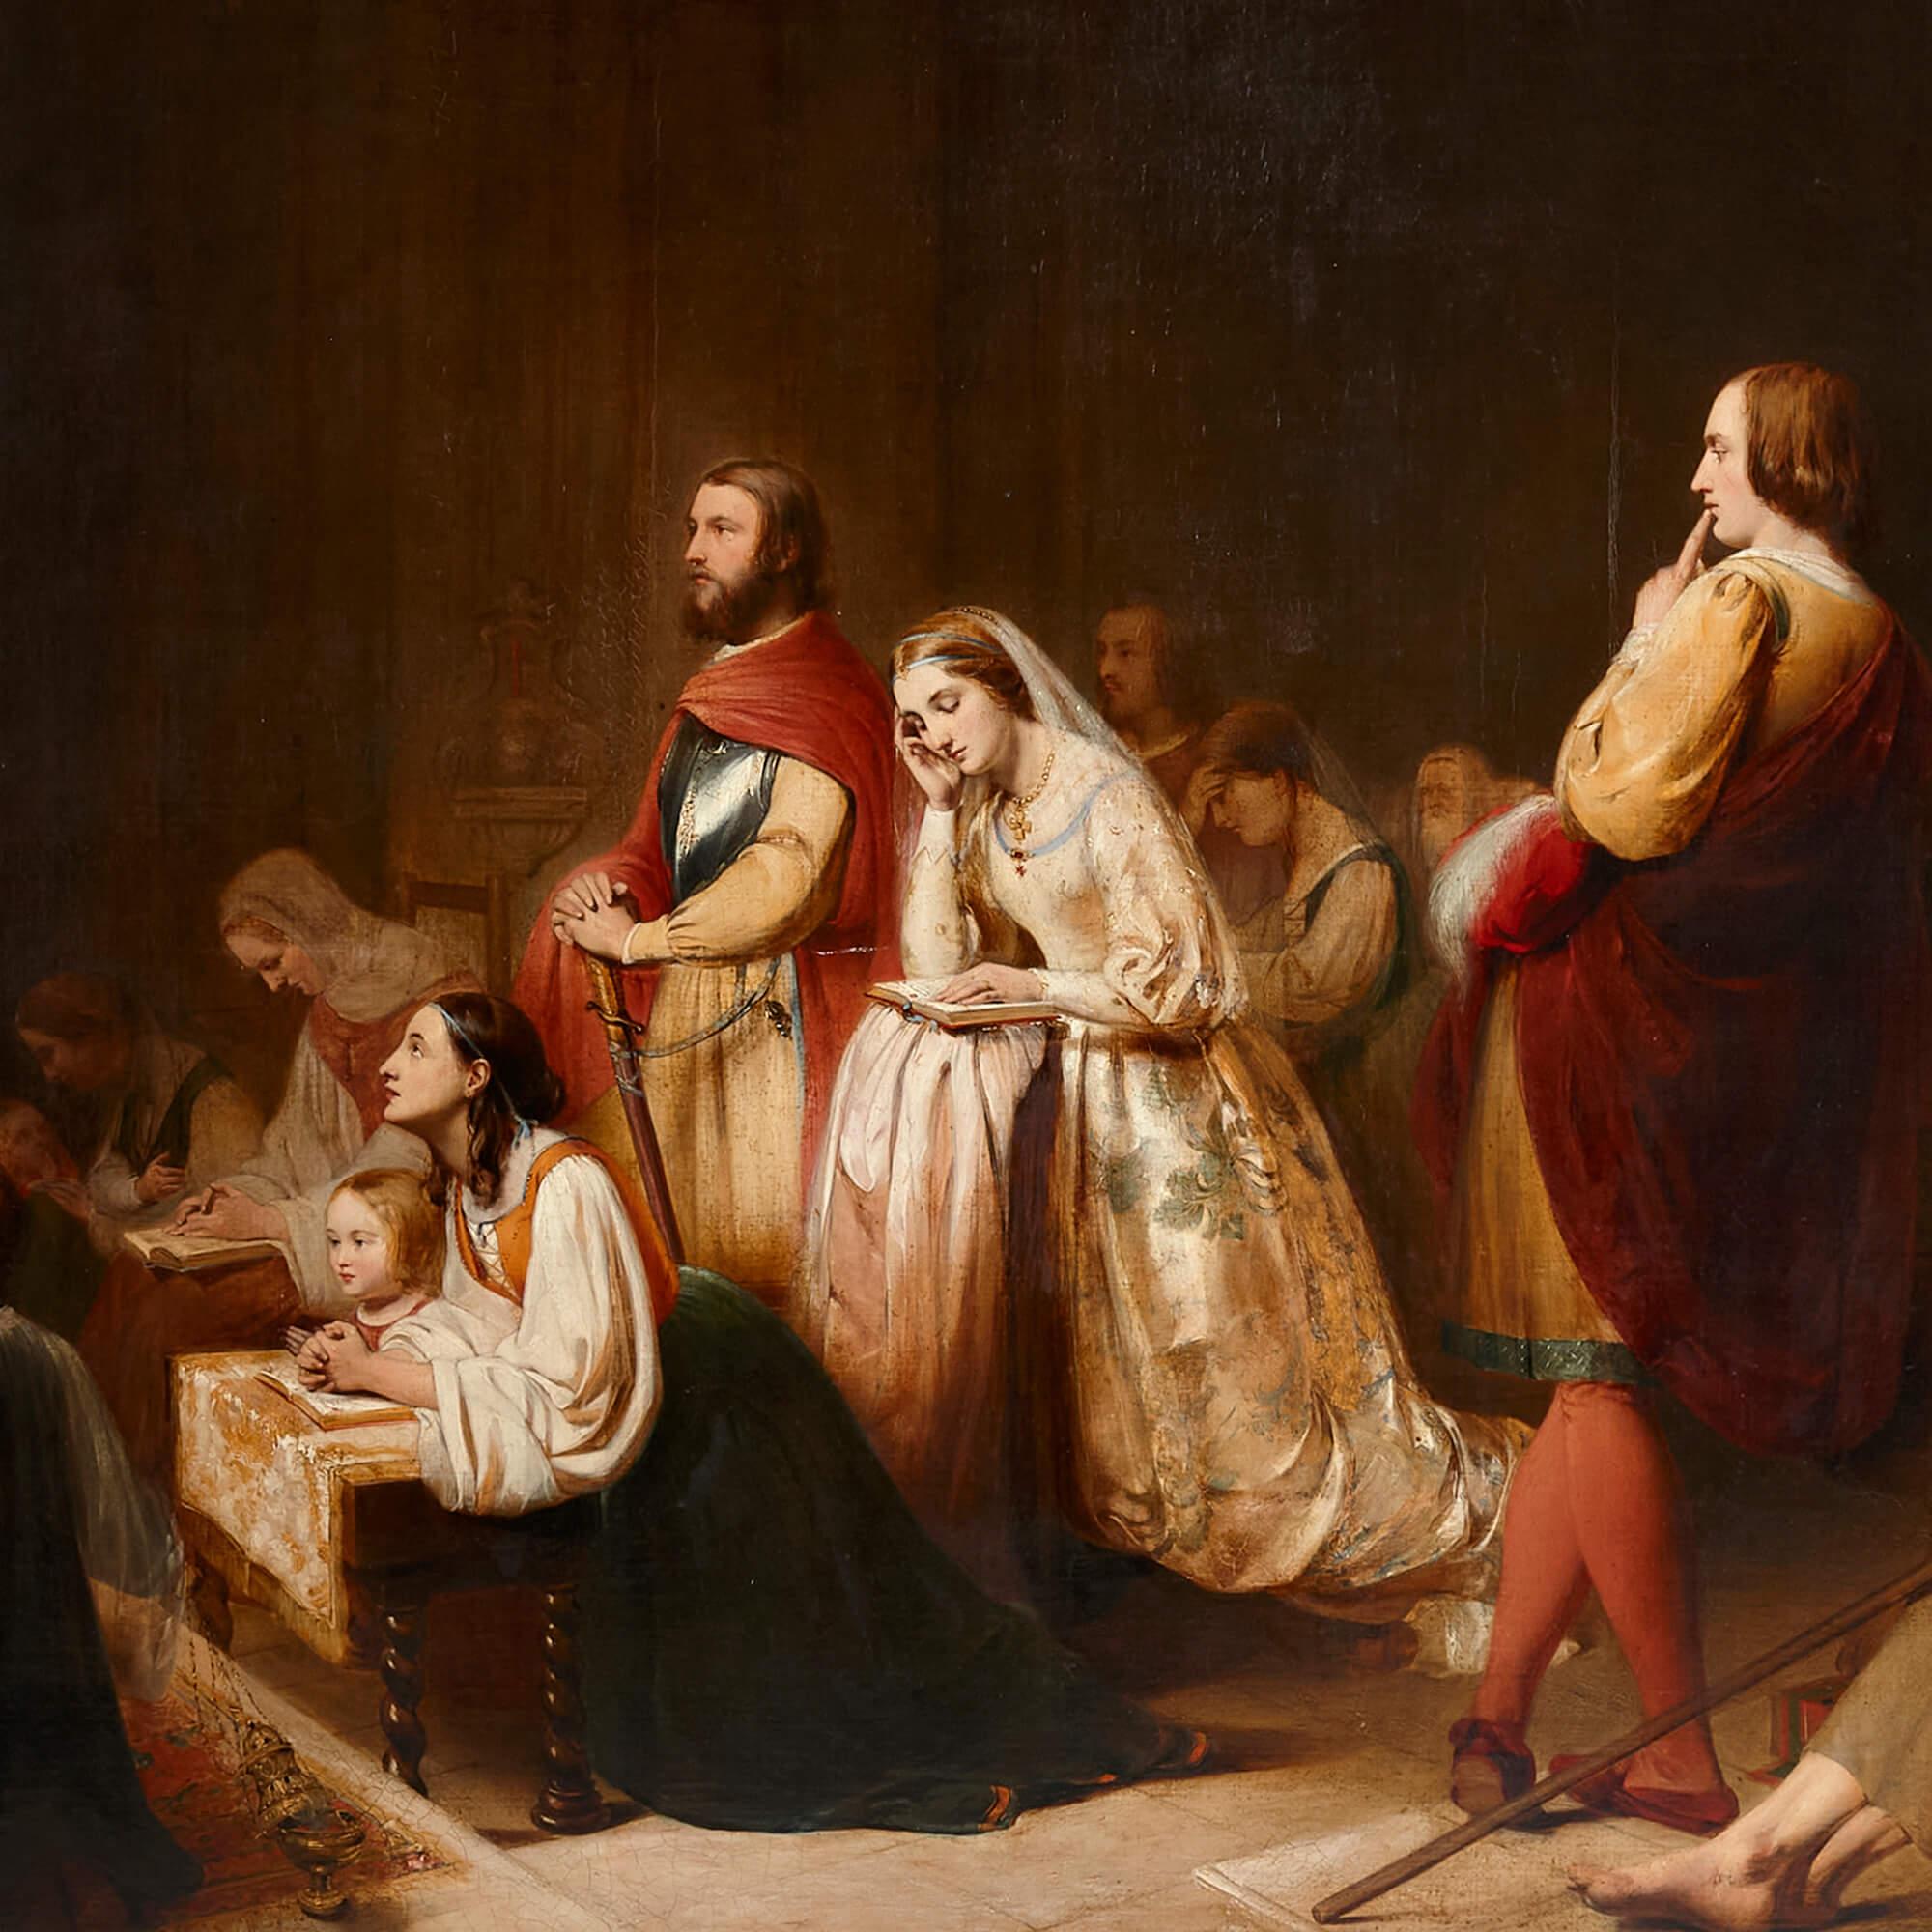 ‘Petrarch’s First Sight of Laura’ early 19th century oil painting by Henry Nelson O’Neil
British, c. 1840
Canvas: Height 129cm, width 176cm
Frame: Height 165cm, width 207cm, depth 12cm

Painted by a renowned Victorian artist, Henry Nelson O’Neil